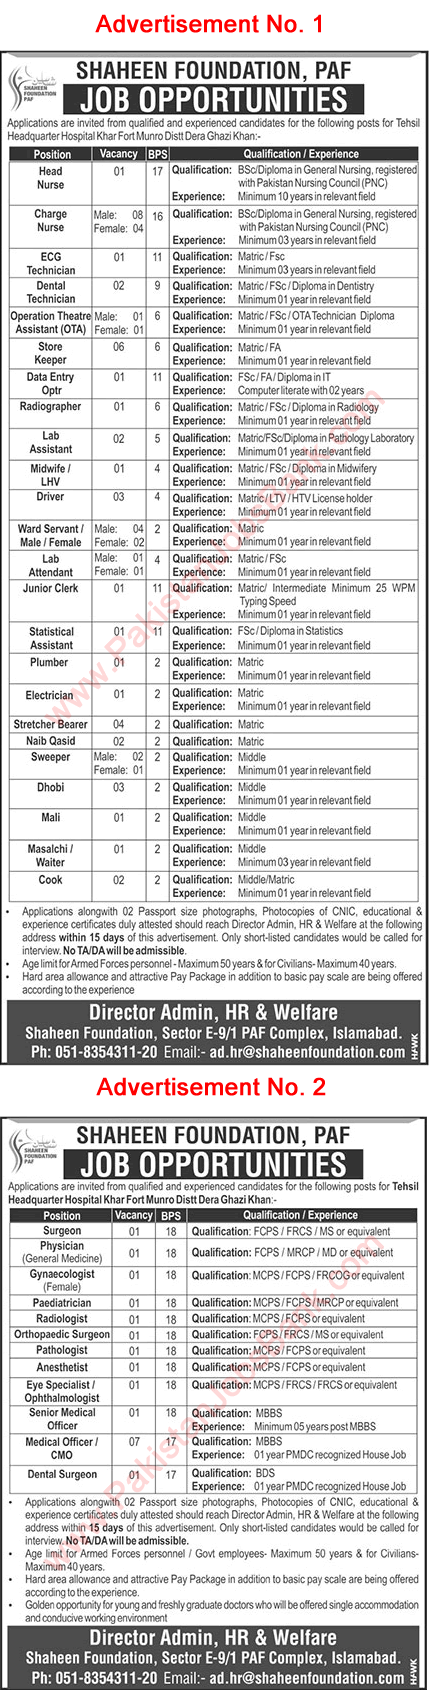 Shaheen Foundation Jobs 2019 August PAF Nurses, Medical Officers / Specialists & Others THQ Hospital Khar Latest